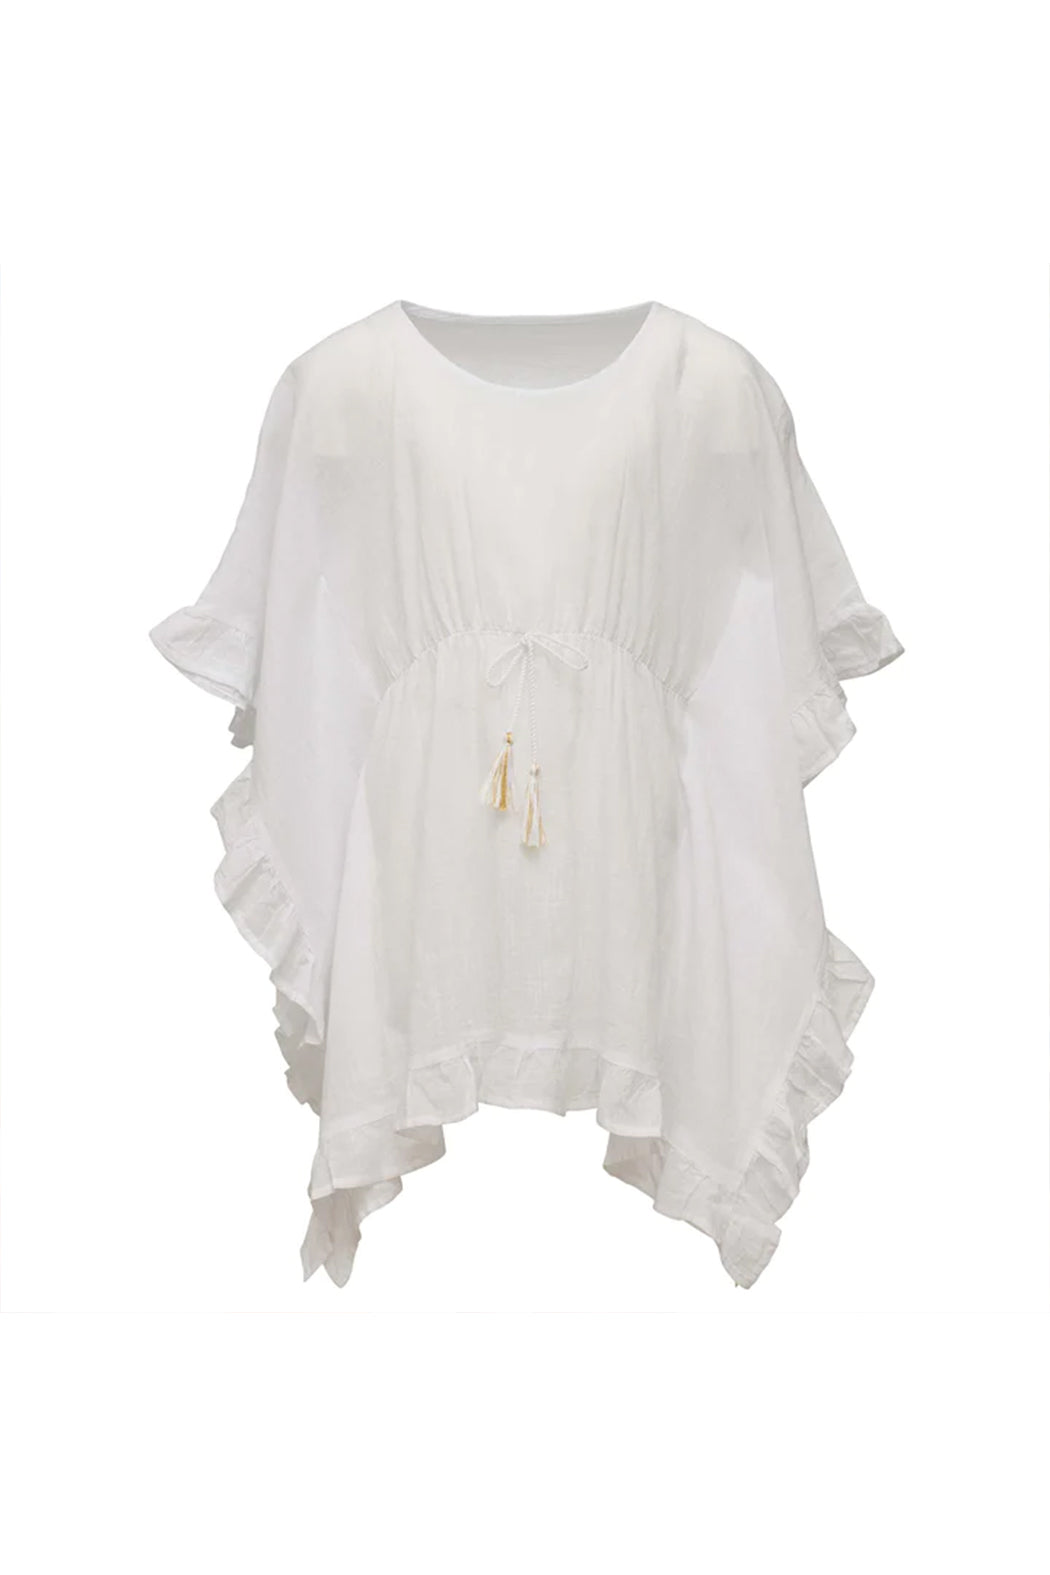 Snapper Rock White Frilled Cover Up